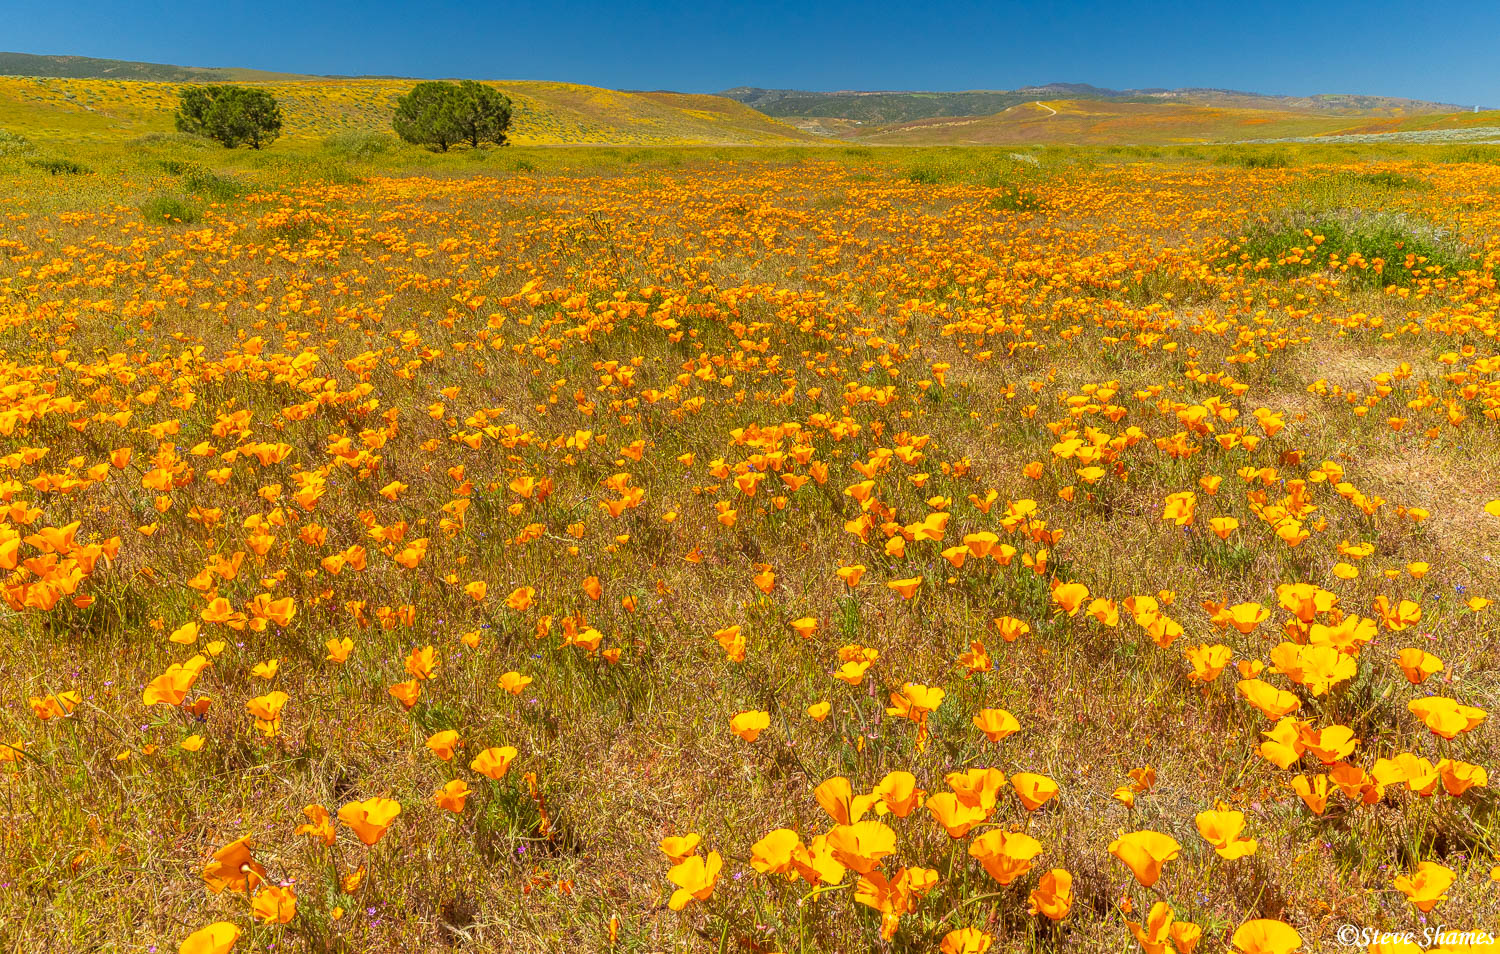 A field of poppies close to the town of Lancaster, in the Antelope Valley.